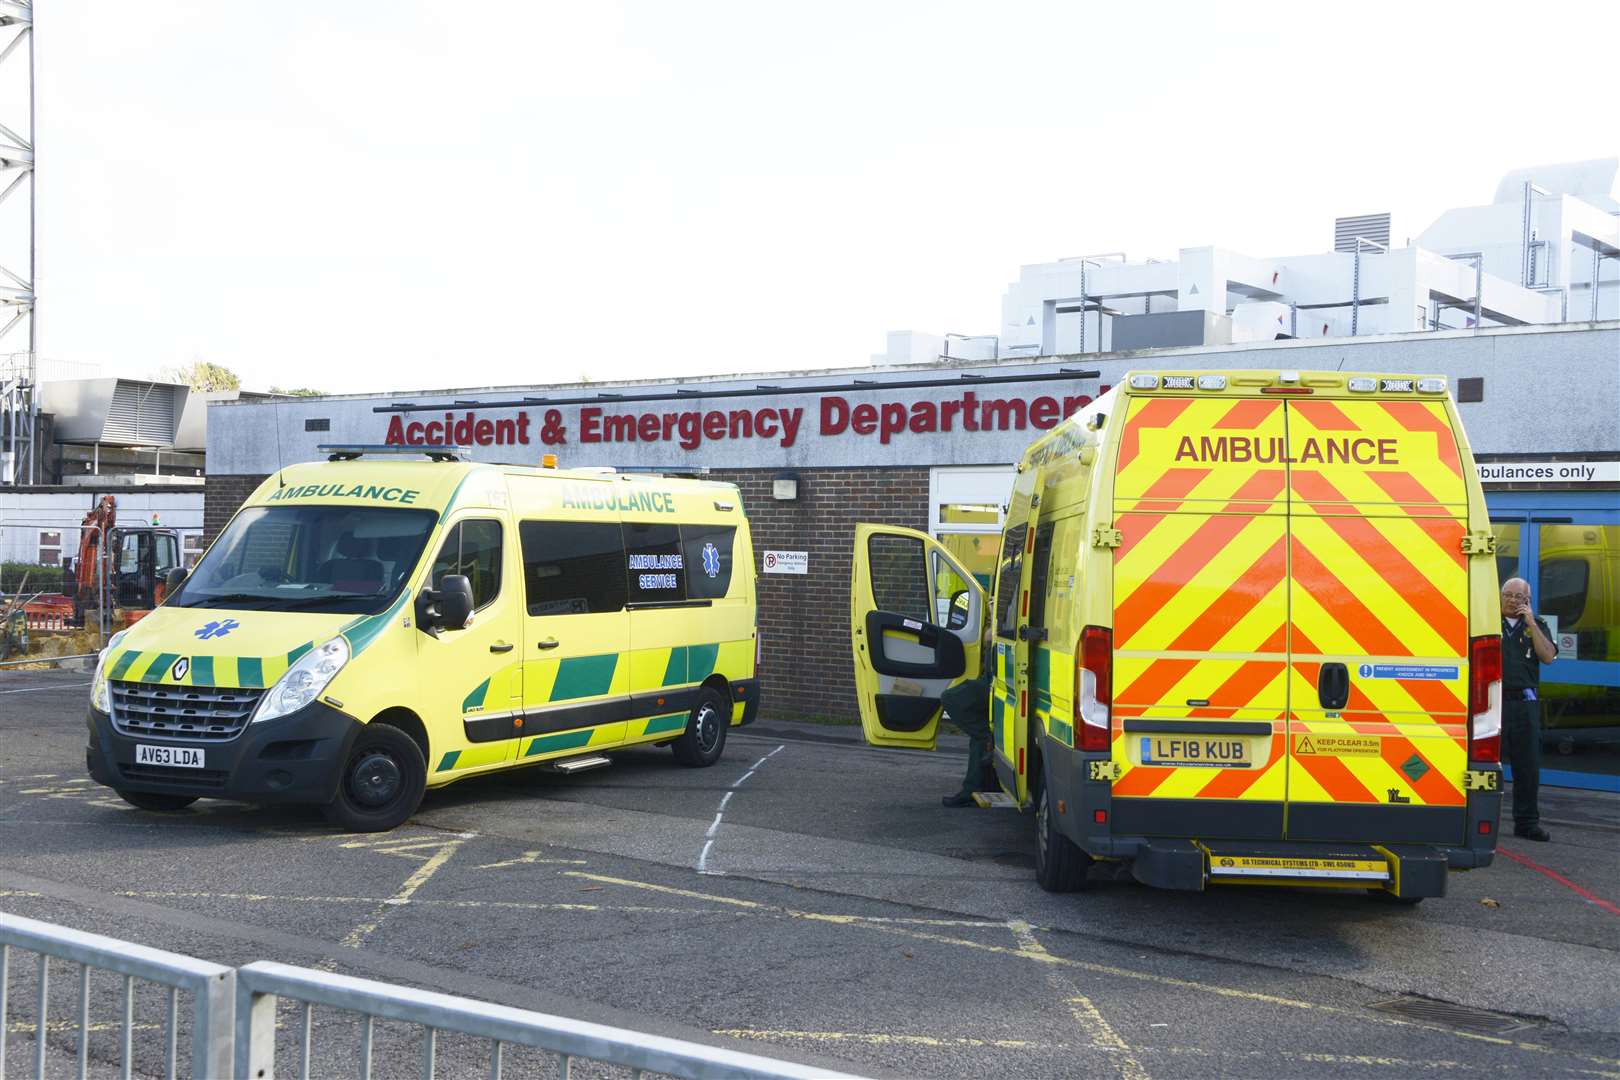 More drip stands have been ordered by bosses at William Harvey Hospital following the incident